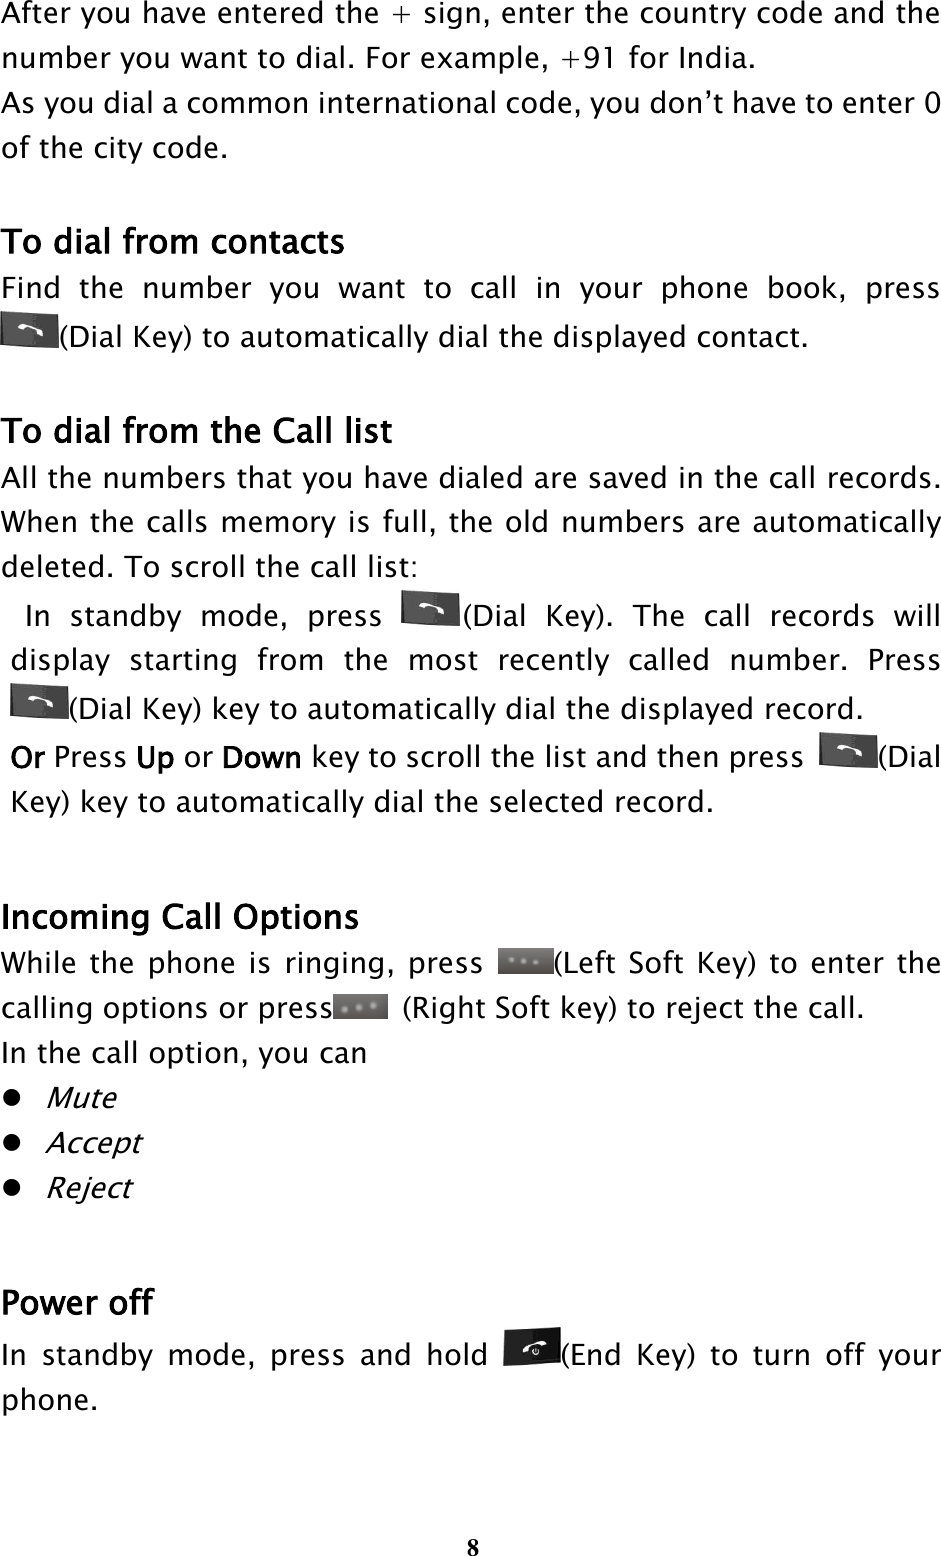  8 After you have entered the + sign, enter the country code and the number you want to dial. For example, +91 for India. As you dial a common international code, you don’t have to enter 0 of the city code.  To dial from contacts Find  the  number  you  want  to  call  in  your  phone  book,  press (Dial Key) to automatically dial the displayed contact.  To dial from the Call list All the numbers that you have dialed are saved in the call records. When the calls memory is full, the old numbers are automatically deleted. To scroll the call list:   In  standby  mode,  press  (Dial  Key).  The  call  records  will display  starting  from  the  most  recently  called  number.  Press (Dial Key) key to automatically dial the displayed record. Or Press Up or Down key to scroll the list and then press  (Dial Key) key to automatically dial the selected record.  Incoming Call Options   While the phone is ringing, press  (Left Soft Key) to enter the calling options or press   (Right Soft key) to reject the call.   In the call option, you can  Mute  Accept  Reject  Power off In  standby  mode,  press  and  hold  (End  Key)  to  turn  off  your phone. 